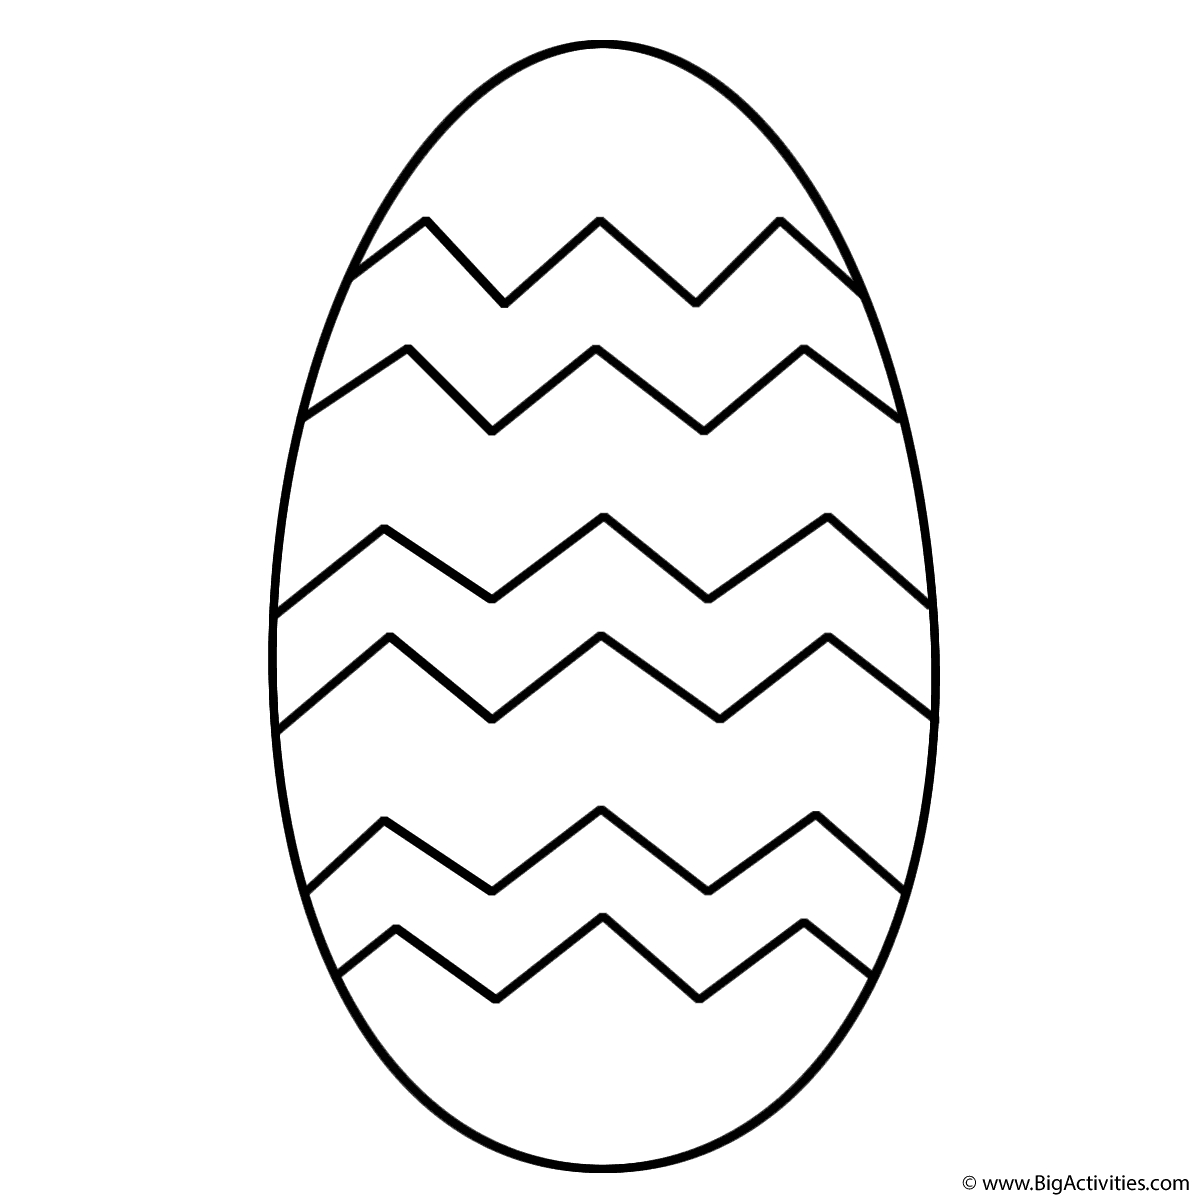 Easter Egg Coloring Page Easter Egg With Patterns Coloring Page Easter